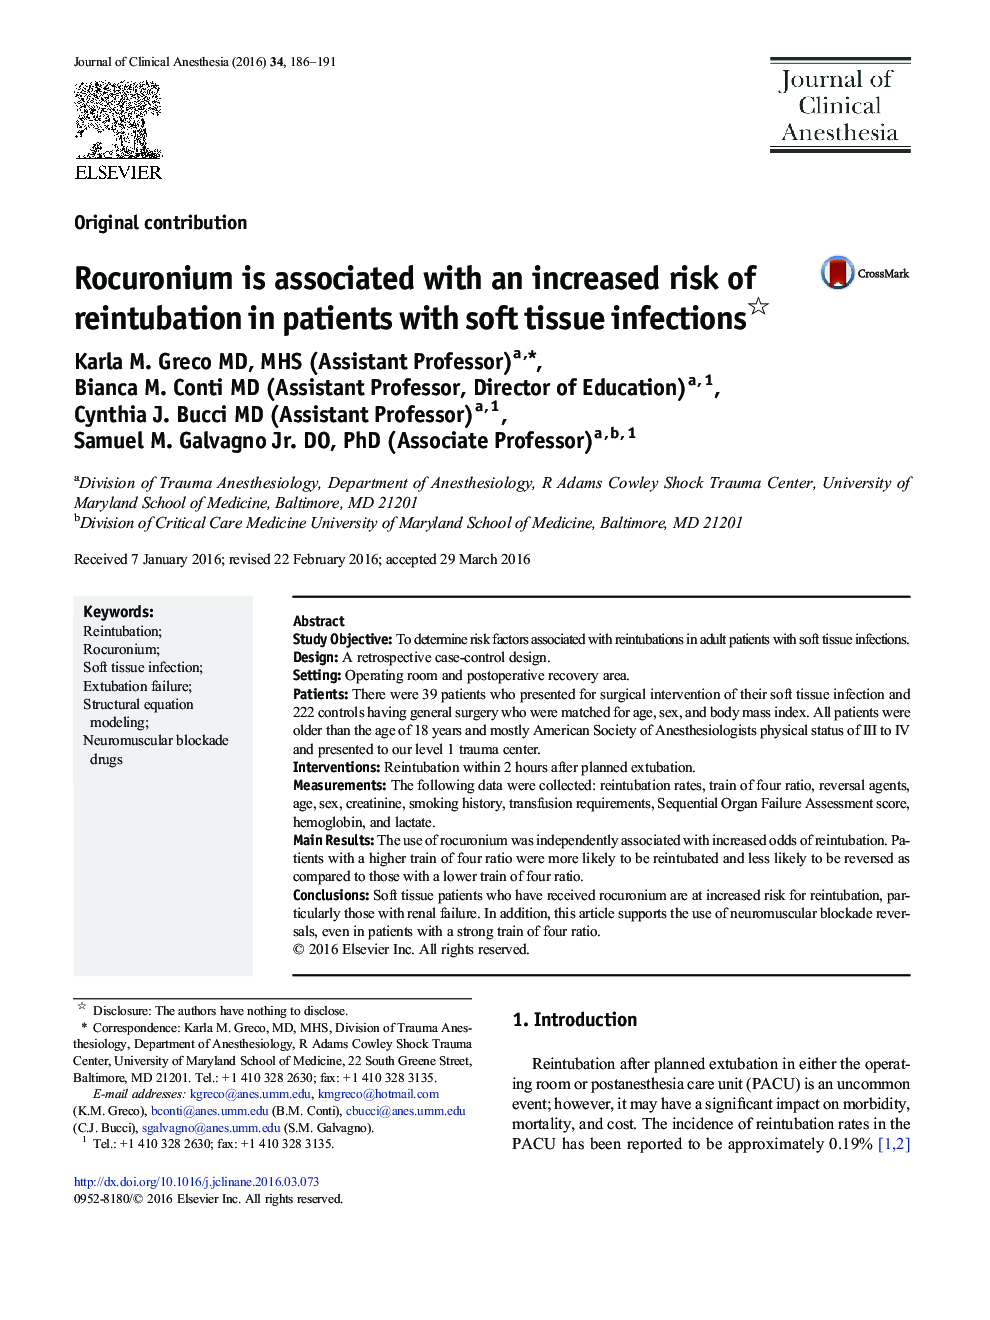 Rocuronium is associated with an increased risk of reintubation in patients with soft tissue infections